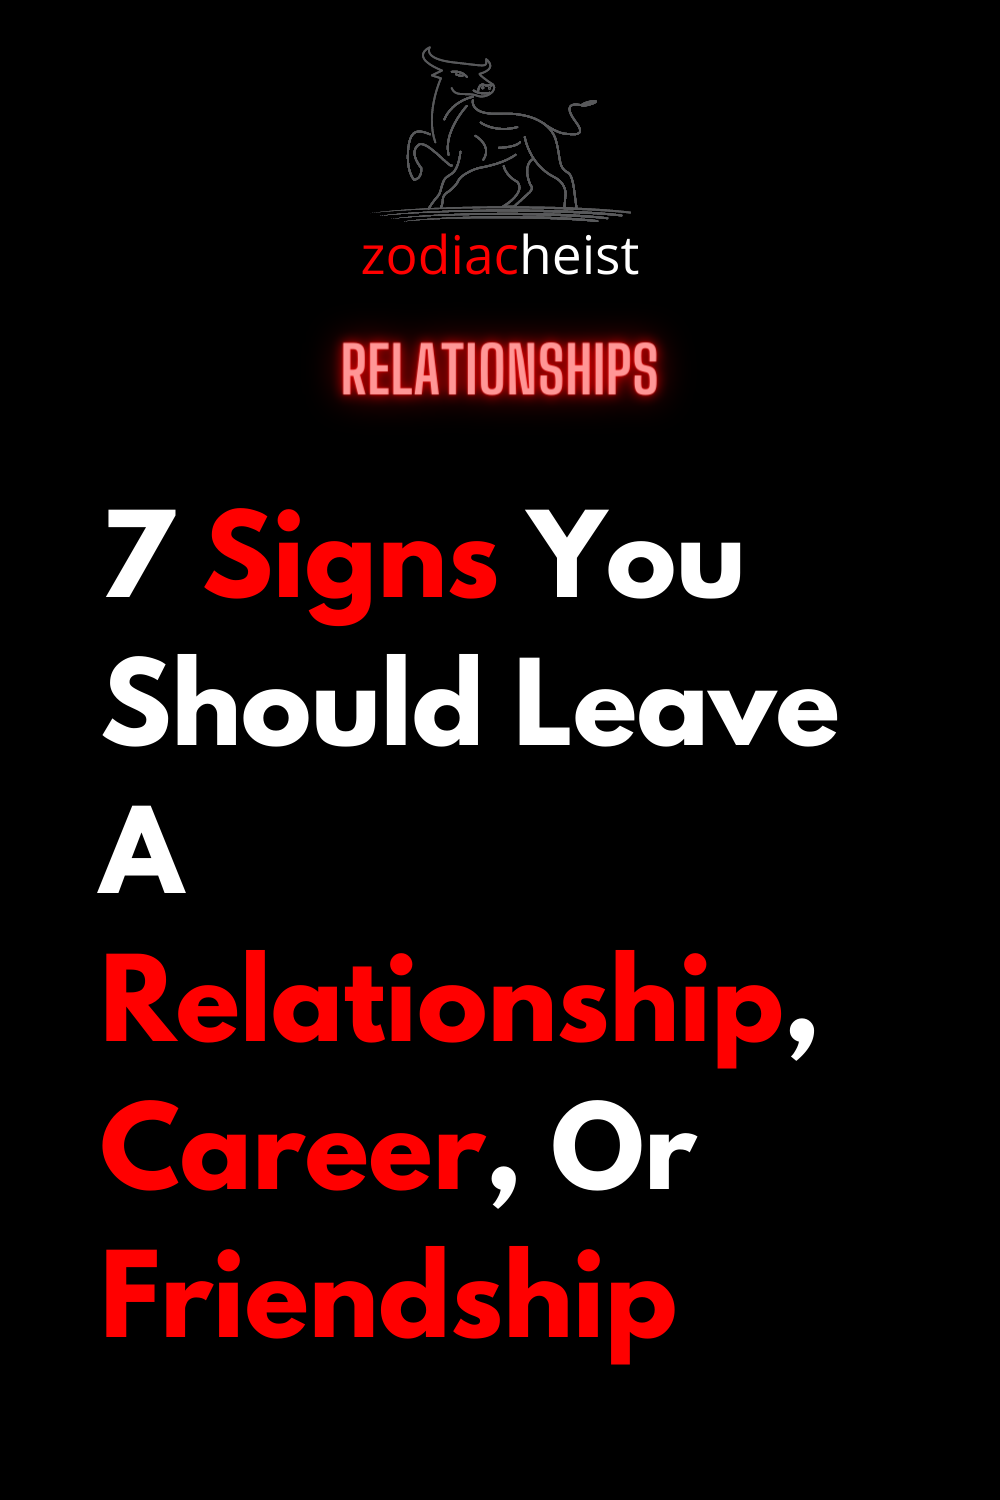 7 Signs You Should Leave A Relationship, Career, Or Friendship